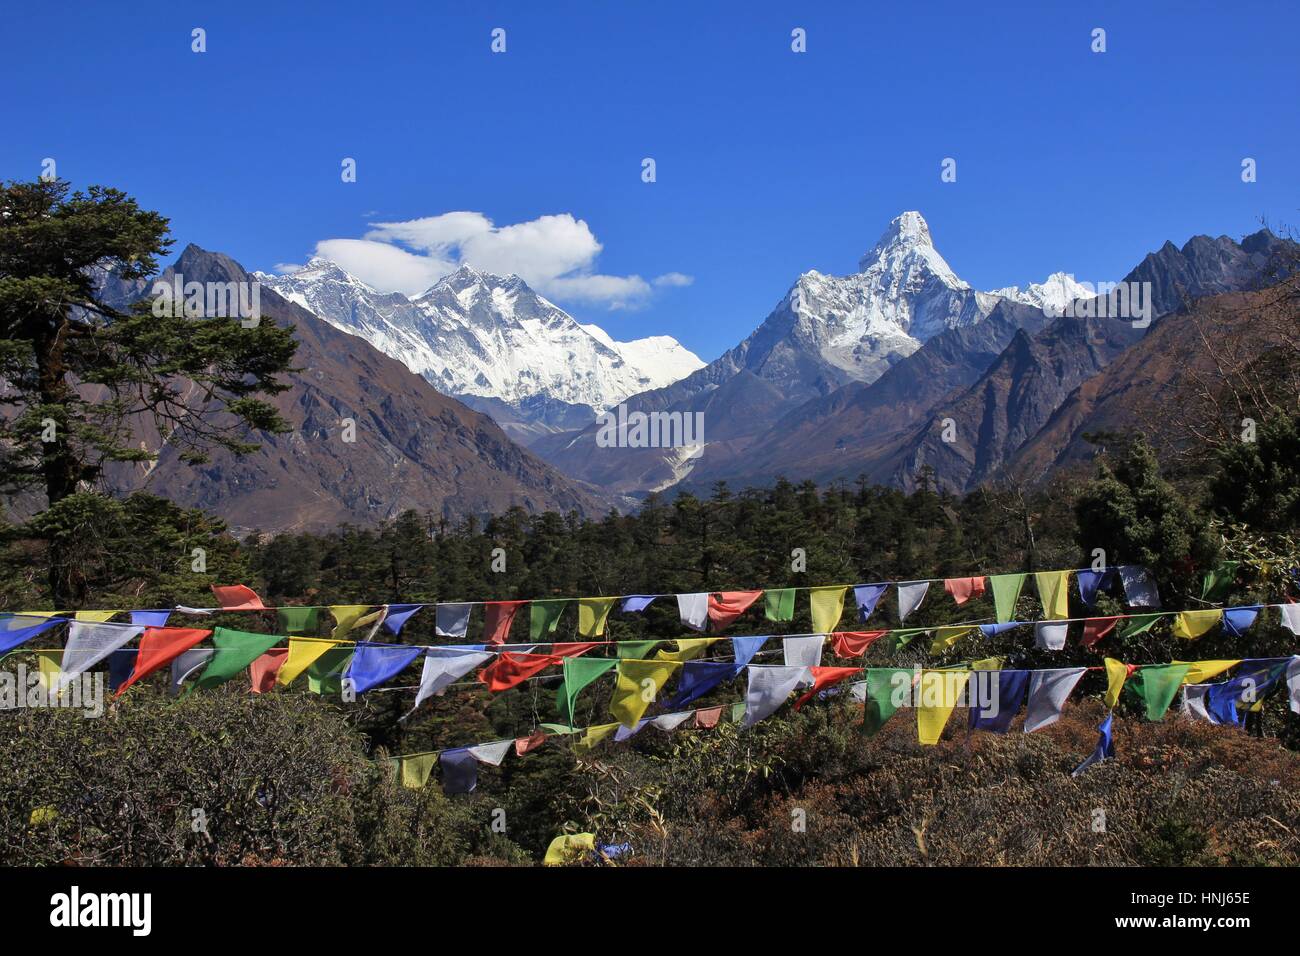 Scene near Khumjung, Everest National Park, Nepal. Prayer flags and snow capped mountains Lhotse and Ama Dablam. Stock Photo